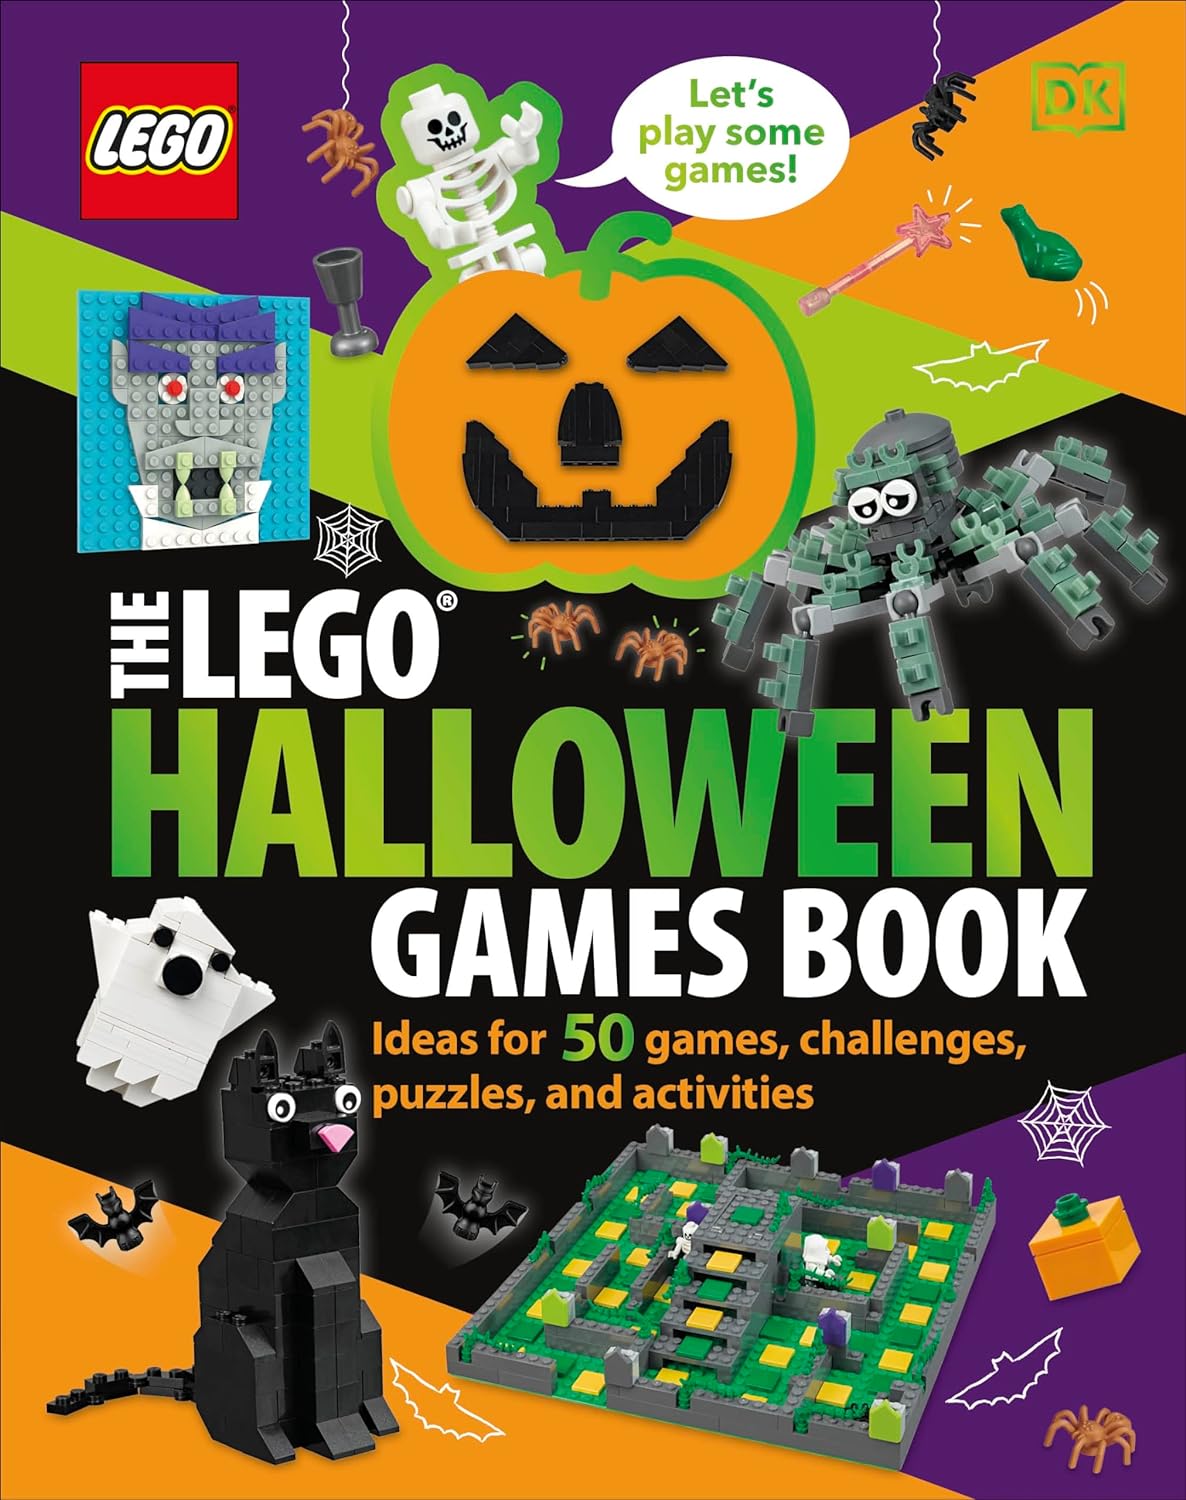 The LEGO Halloween Games Book: Ideas for 50 Games, Challenges, Puzzles, and Activities